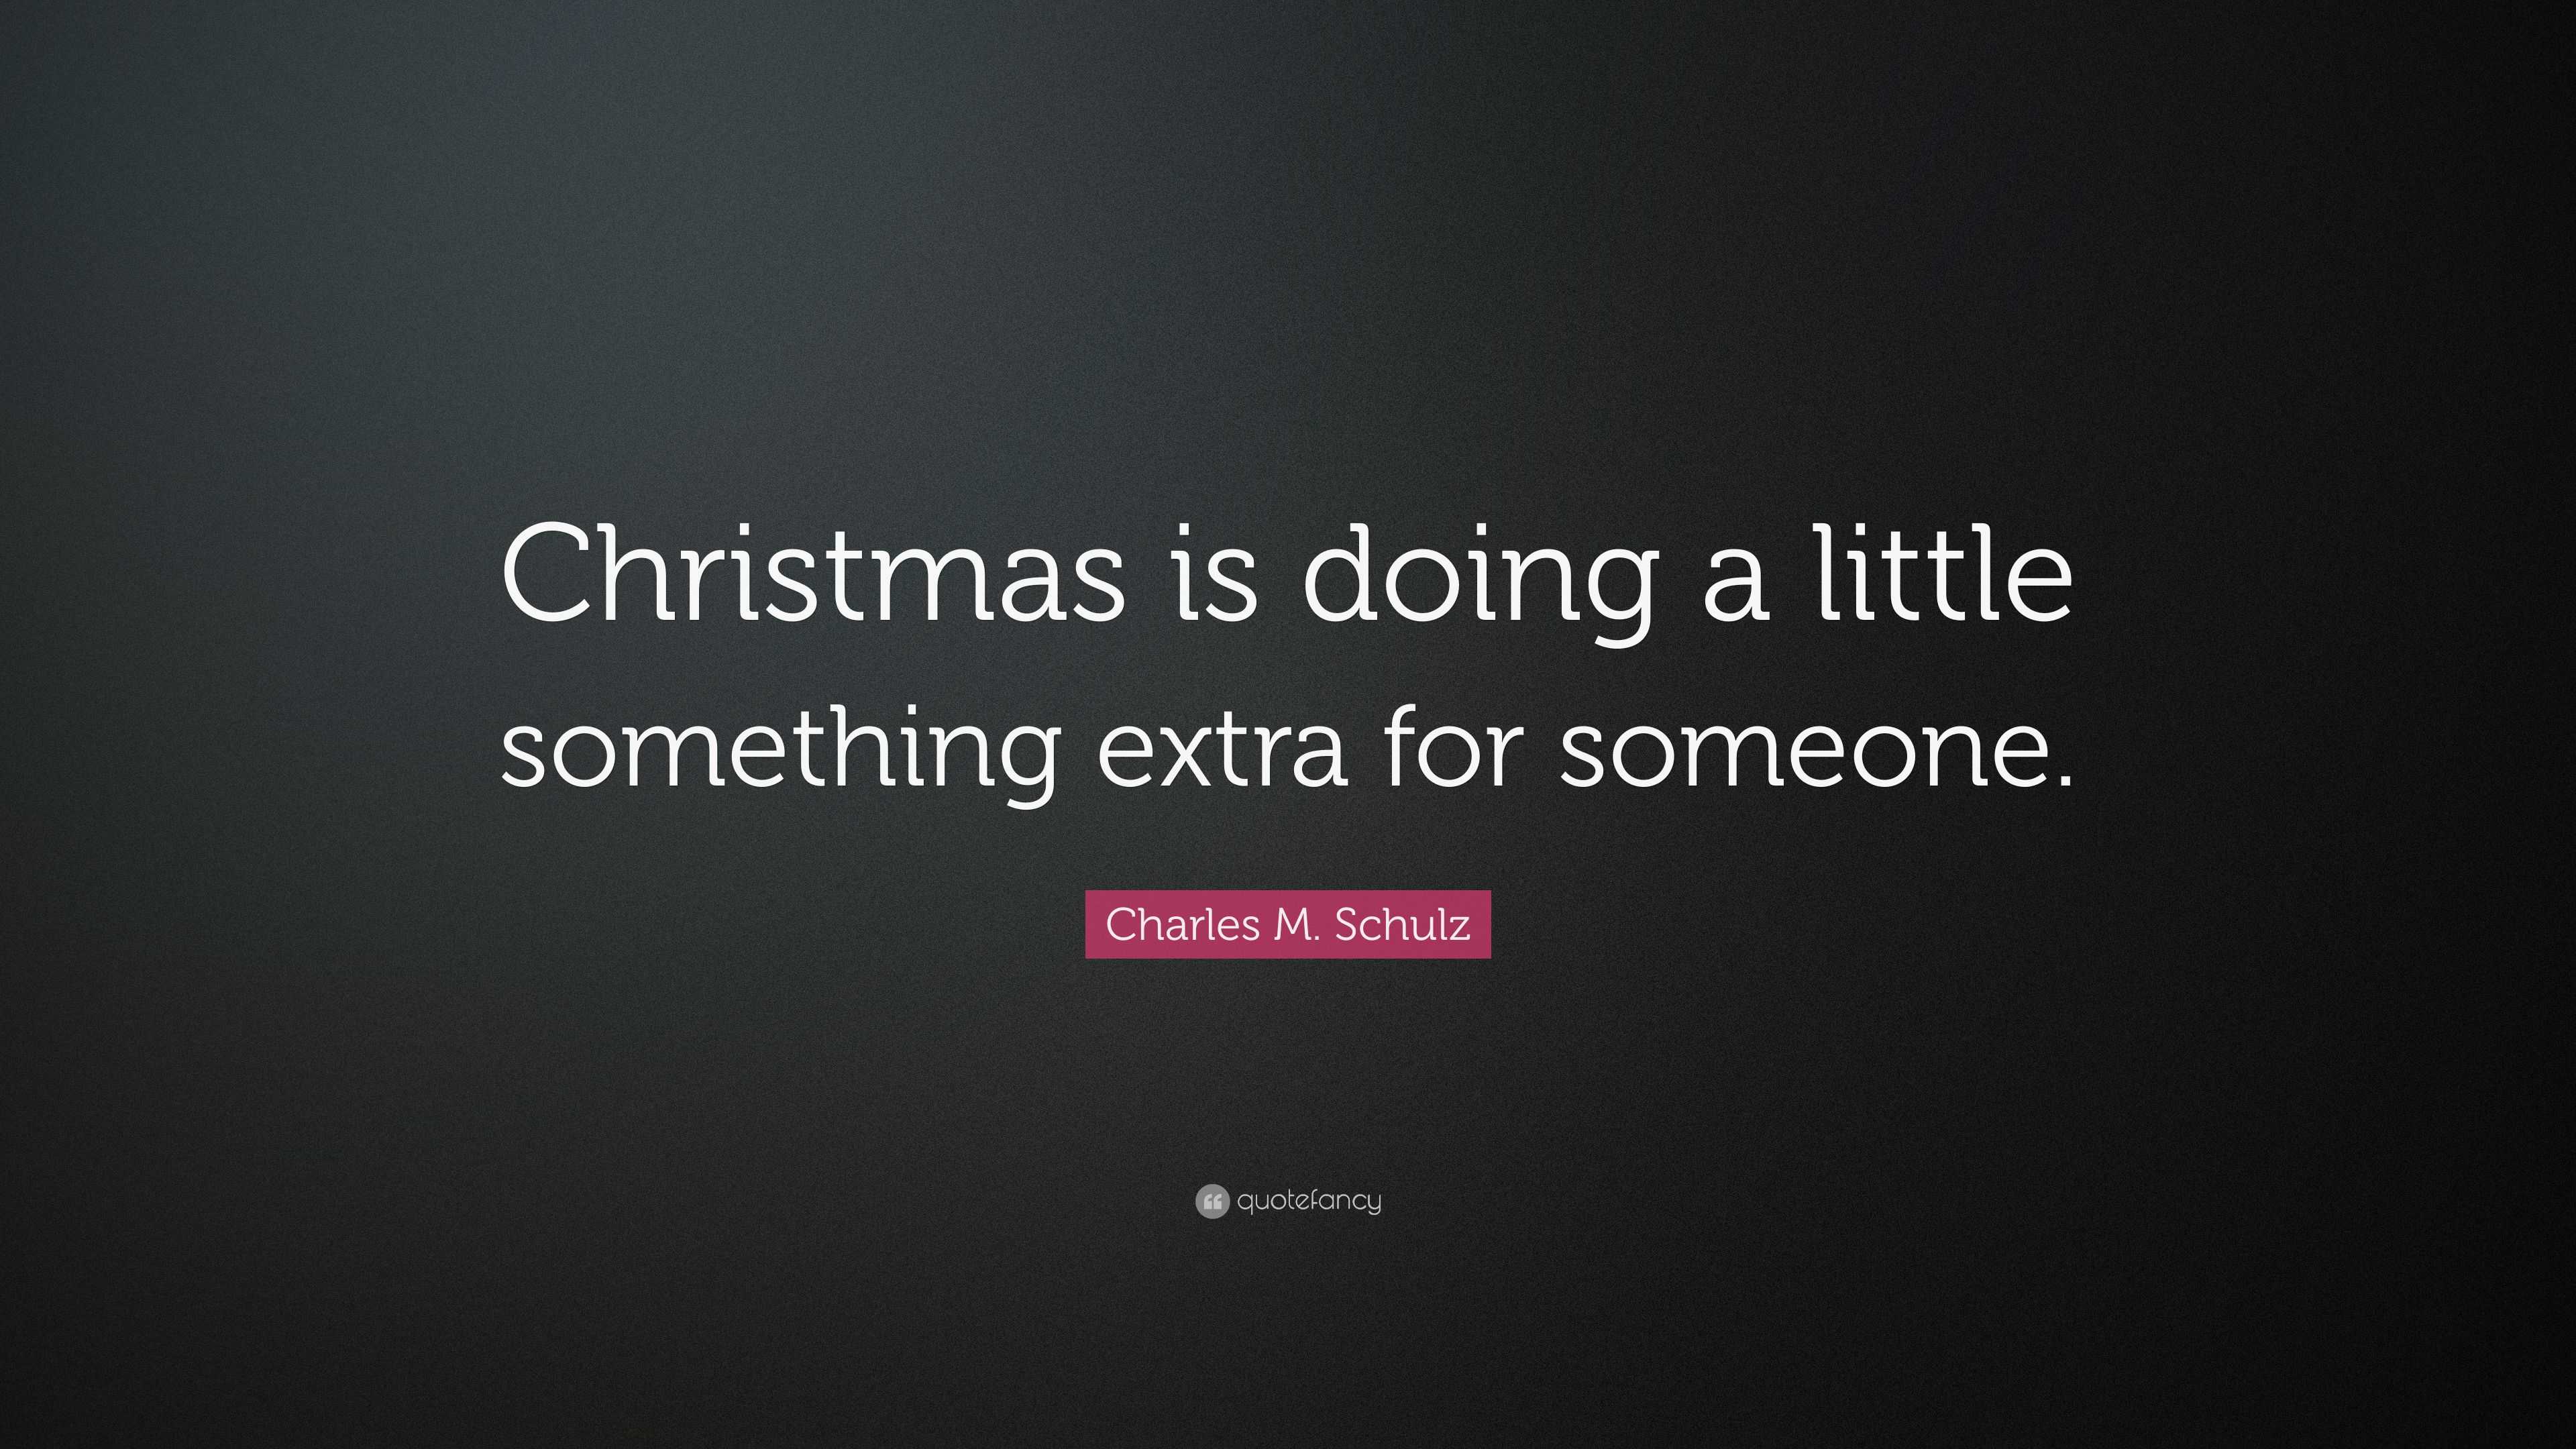 Charles M. Schulz Quote: “Christmas is doing a little something extra ...